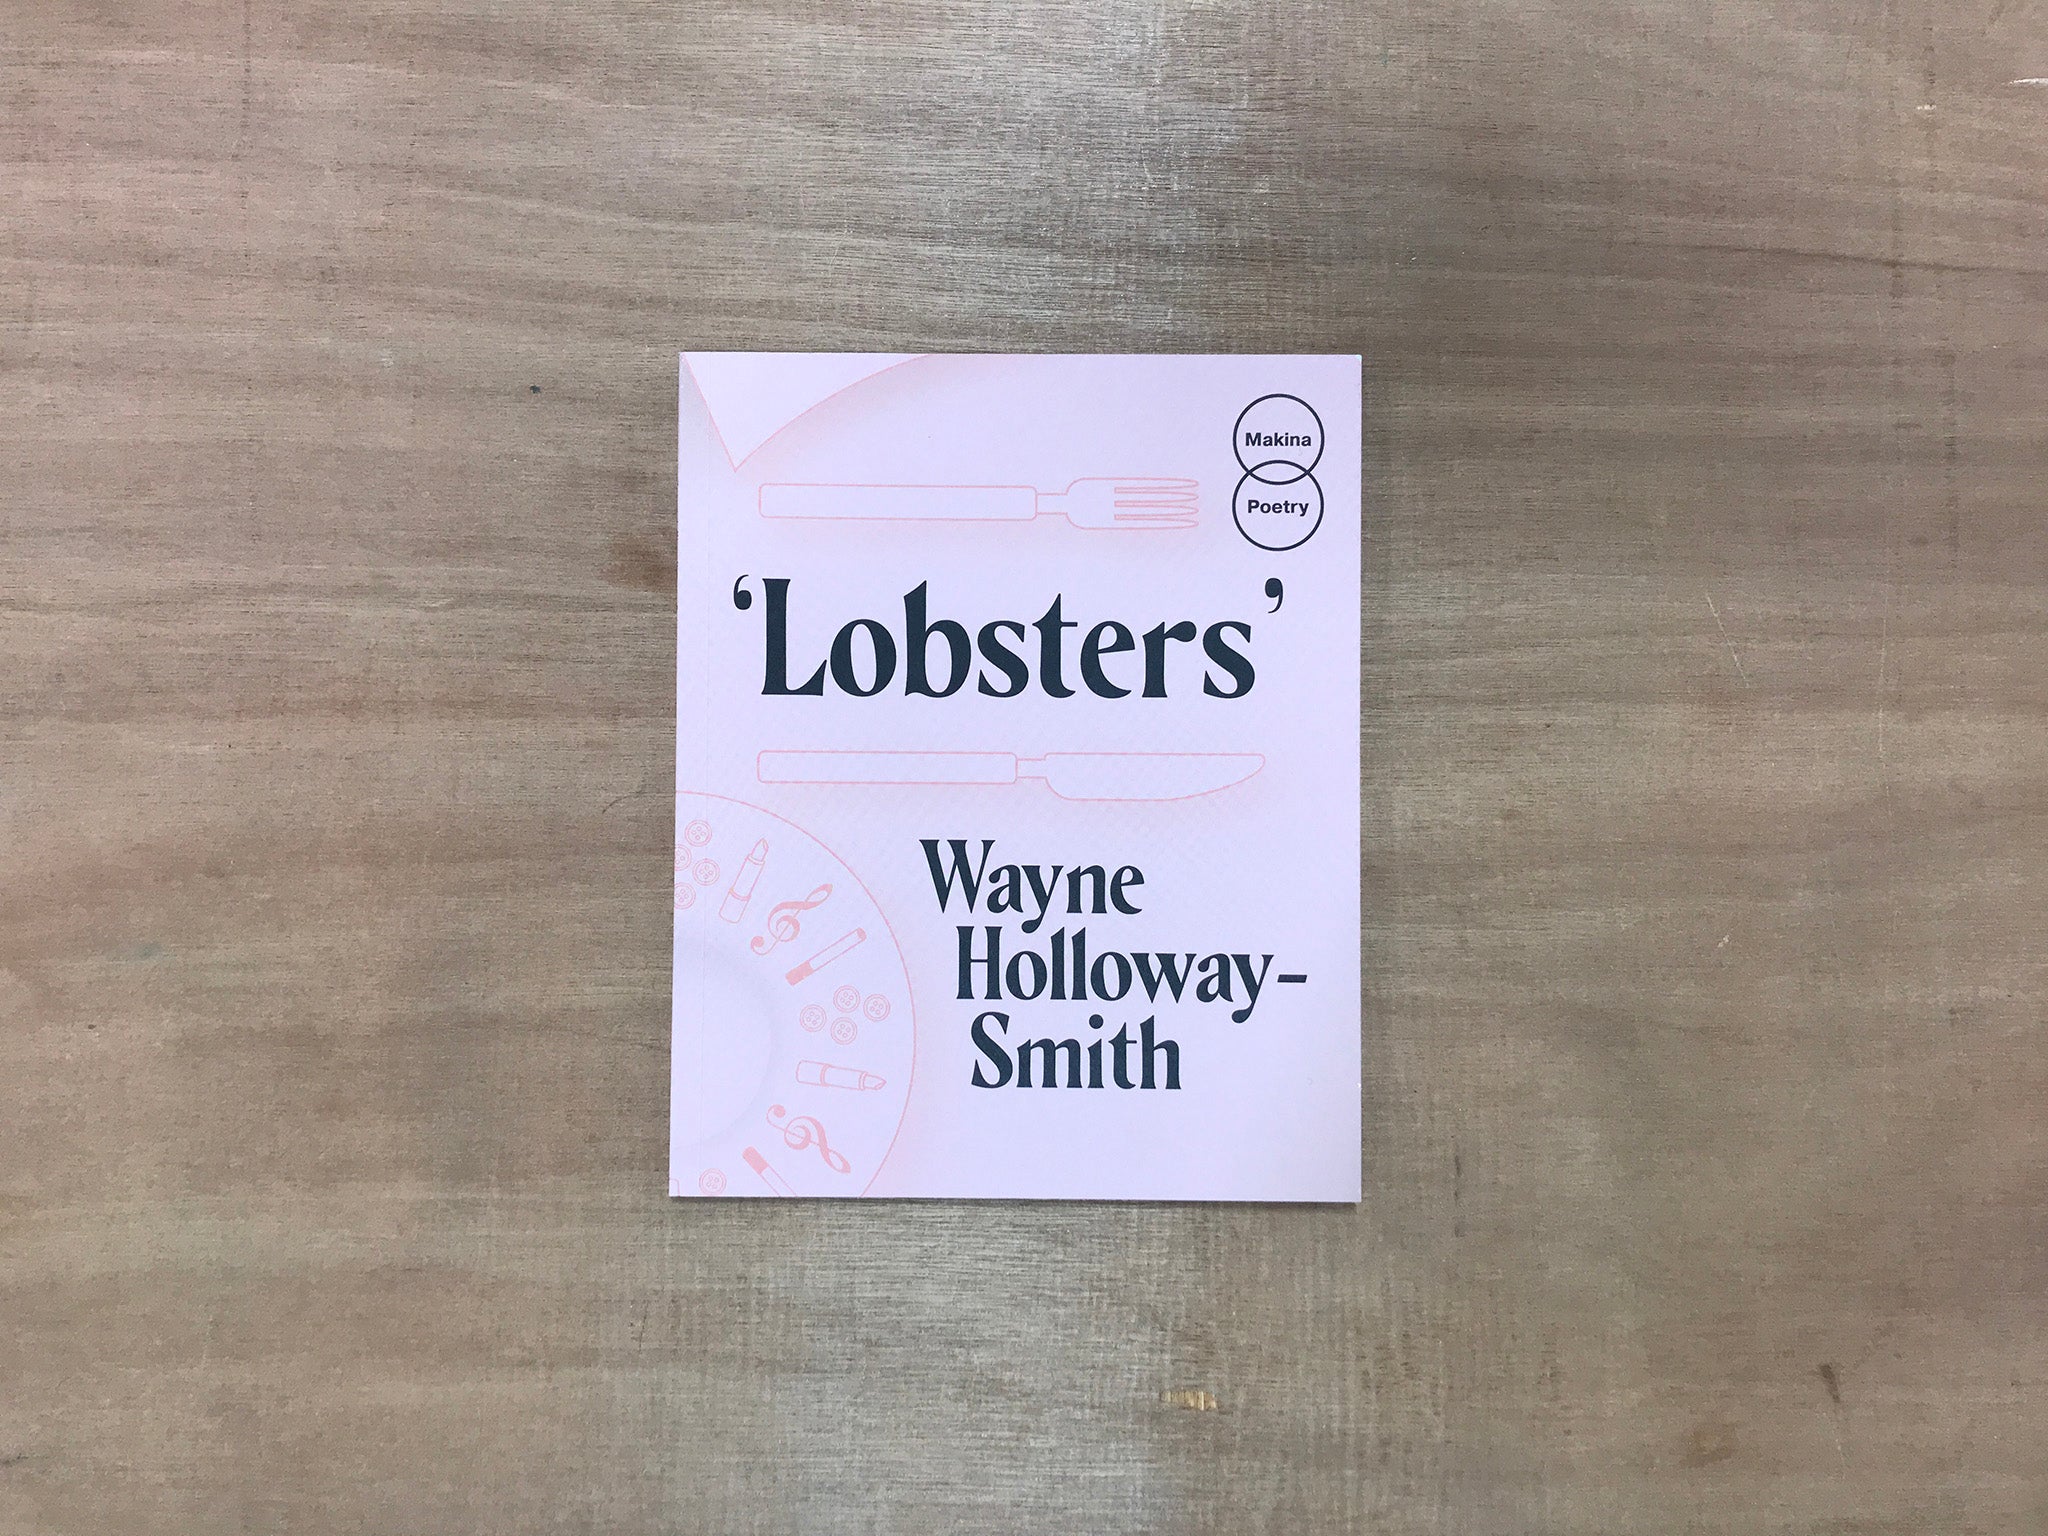 LOBSTERS by Wayne Holloway-Smith